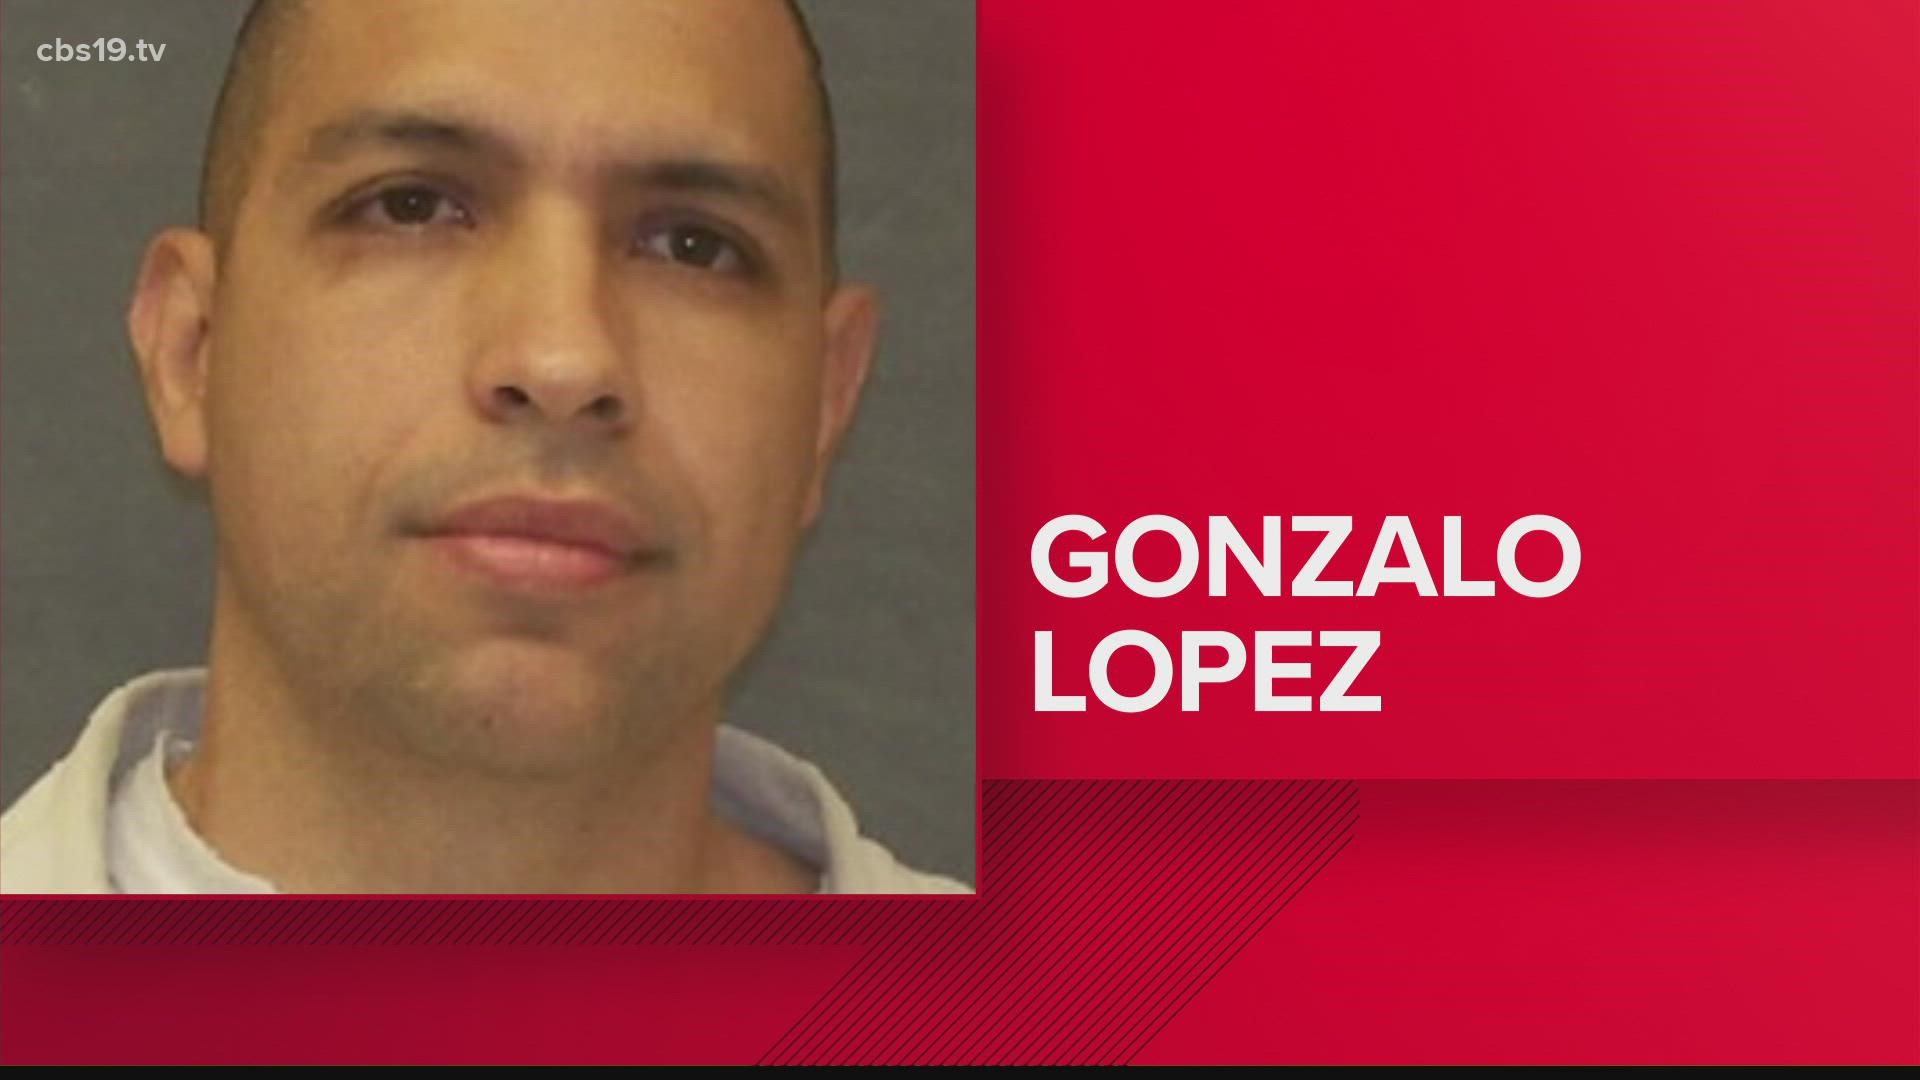 If you spot Gonzalo Lopez, immediately contact 911 and do not approach him.